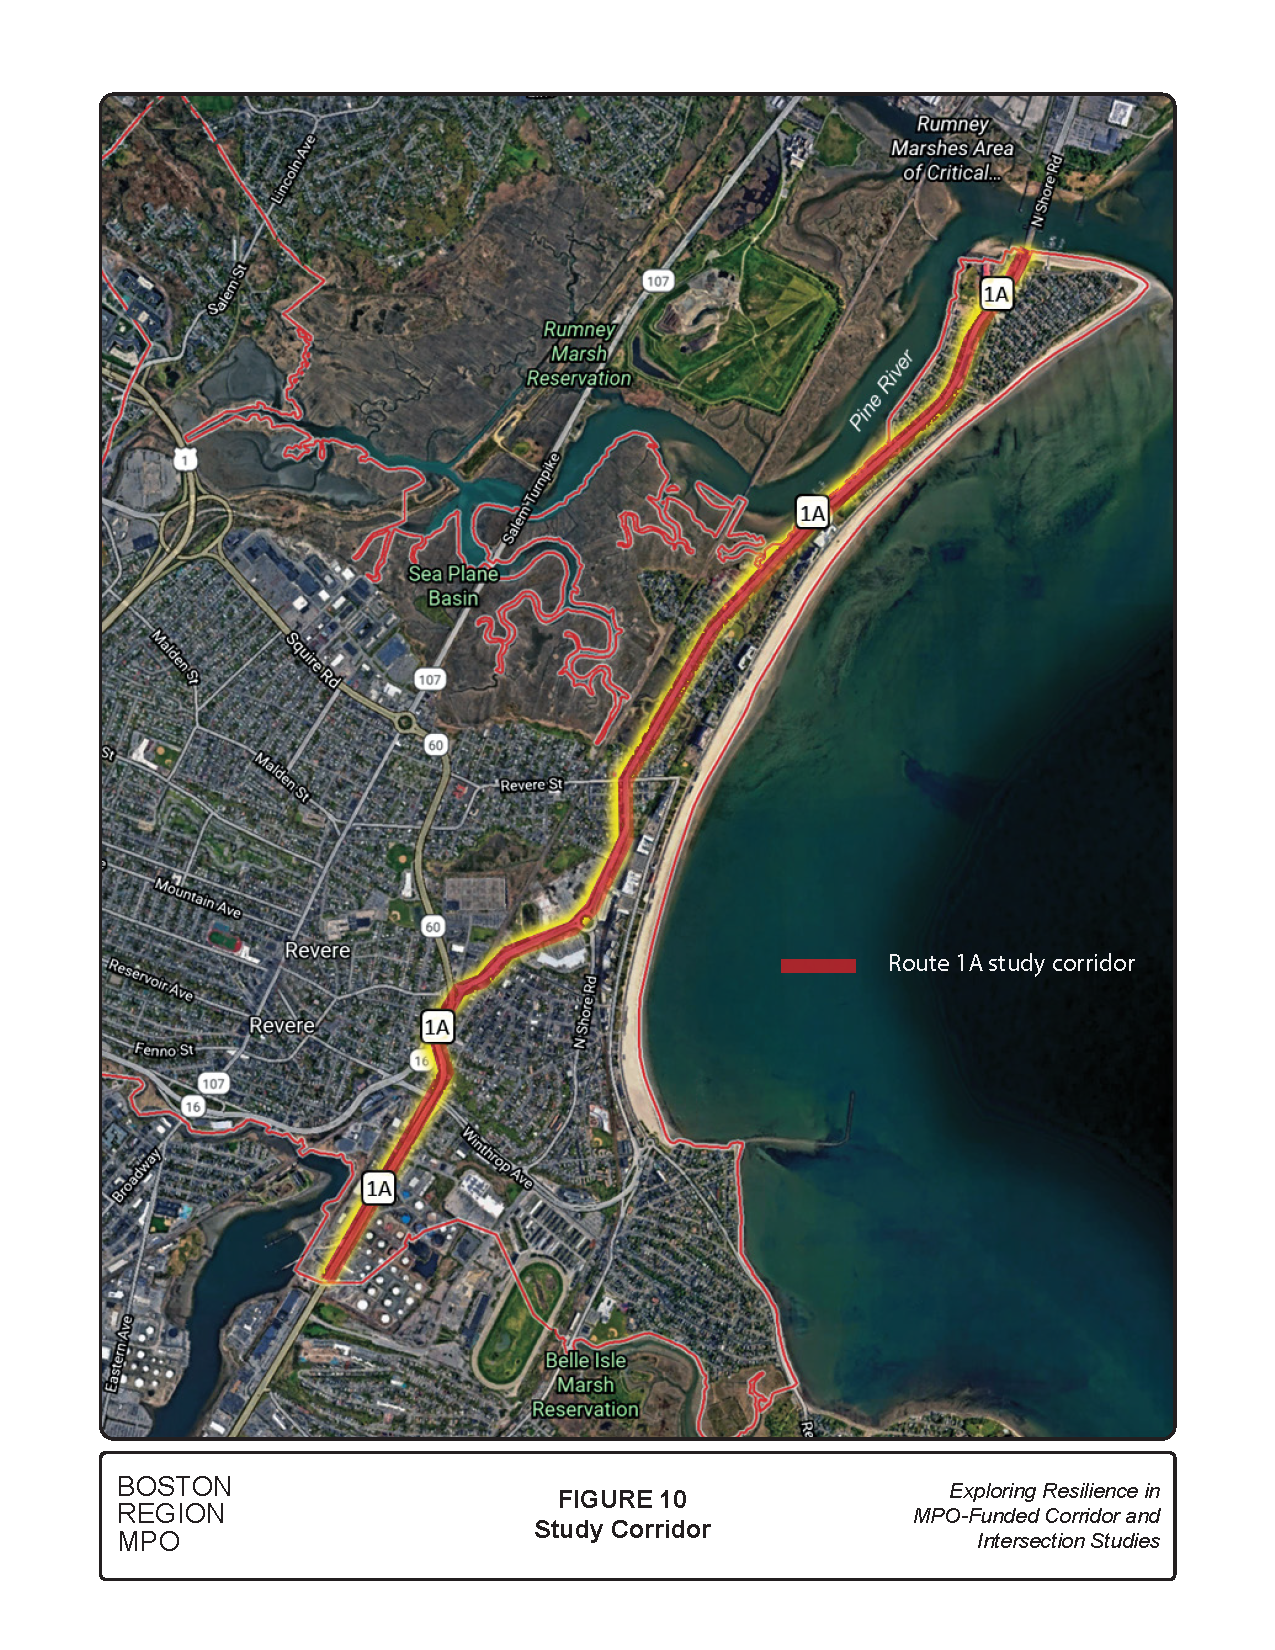 Figure 10 is a map showing the study limits on the four-mile, four-lane highway between the Boston and Lynn city lines.